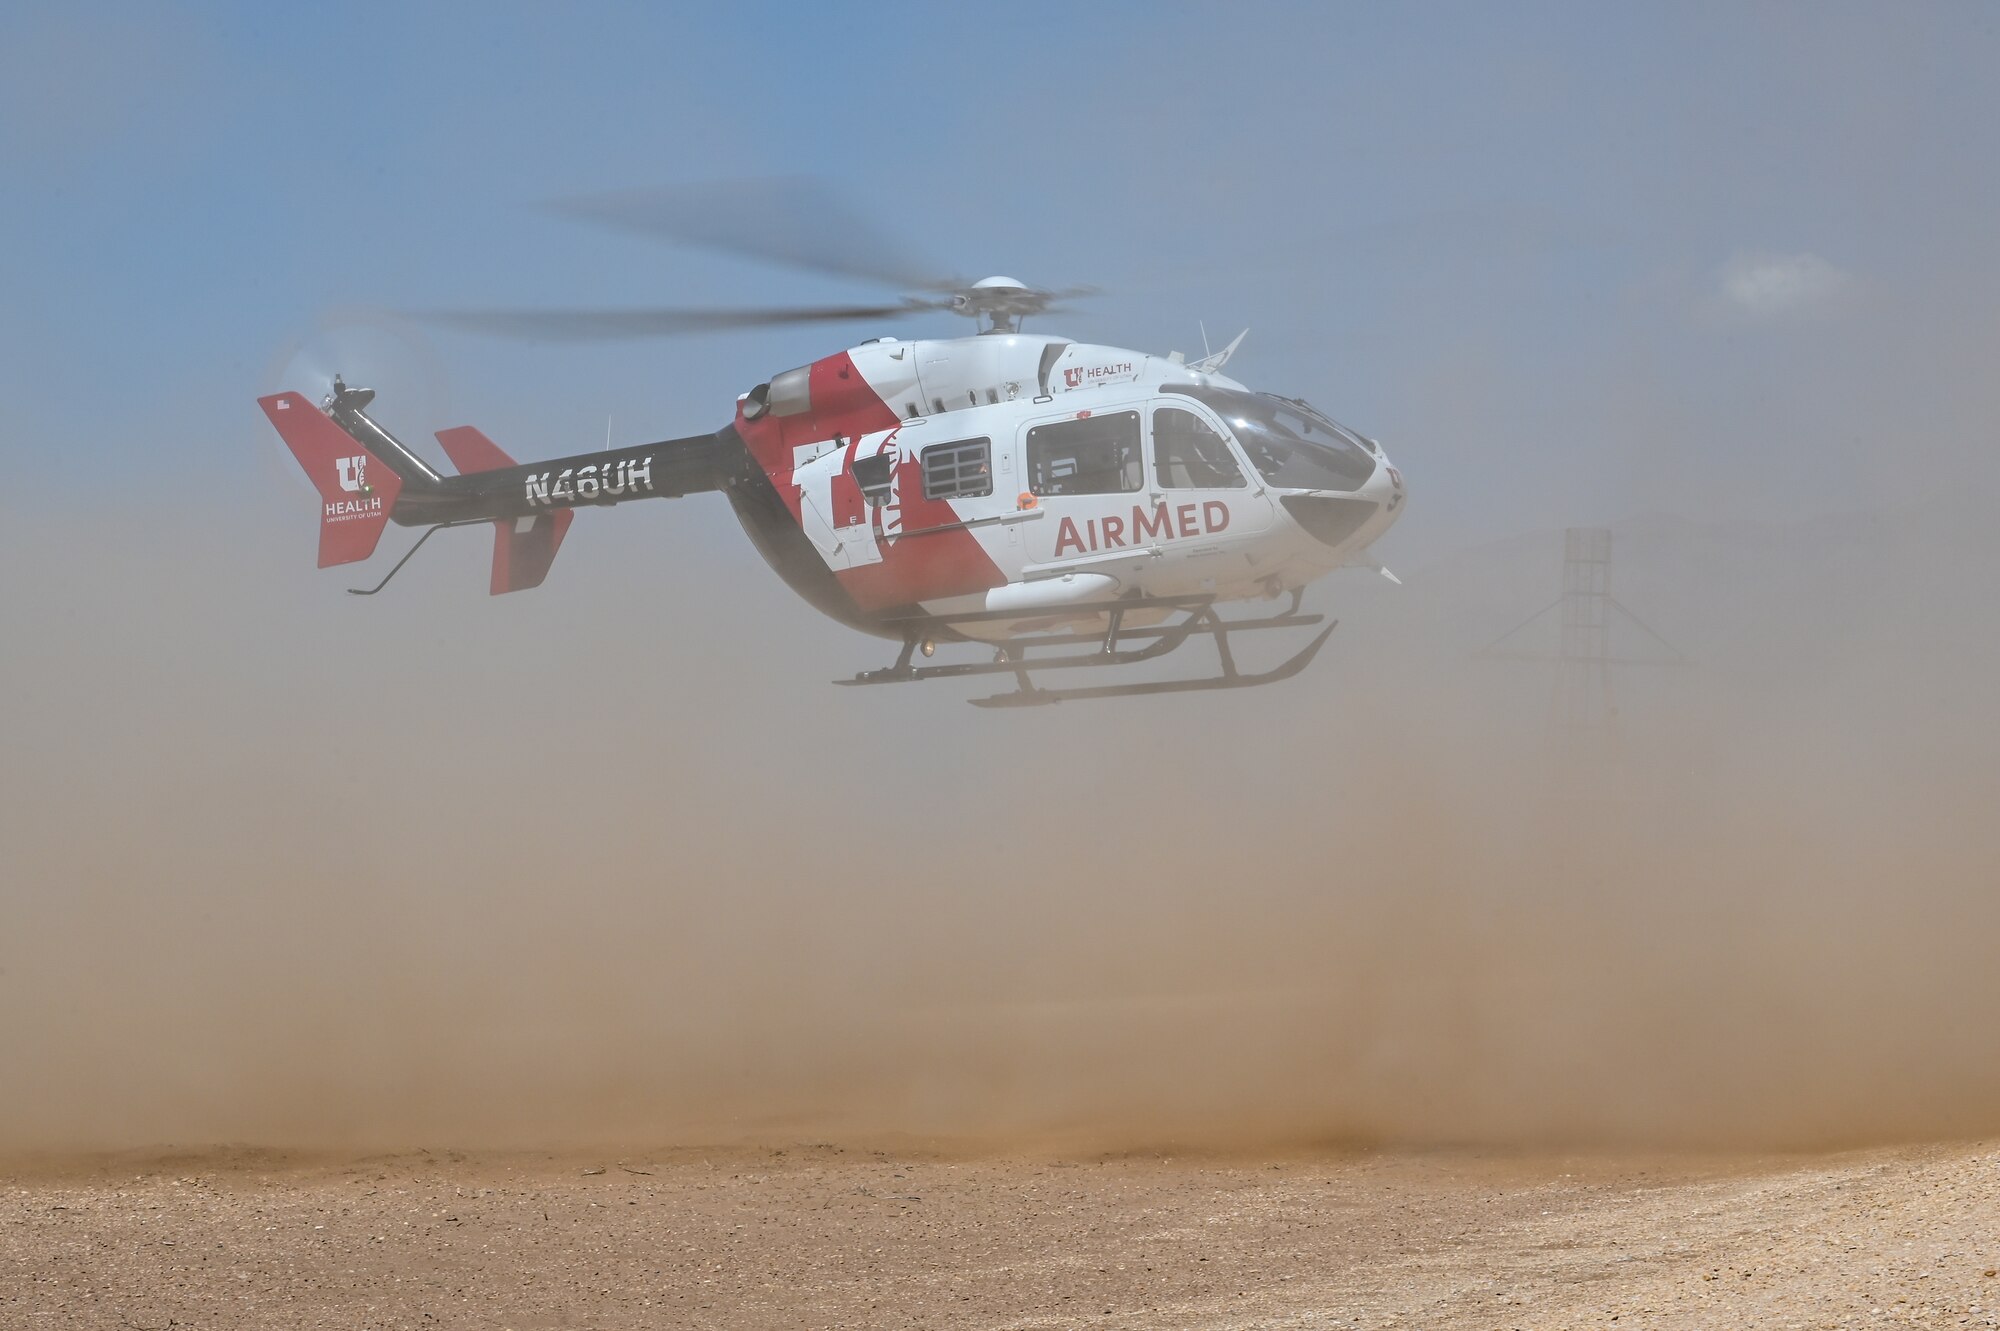 A red and white U of U AirMed helicopter lands in a dusty field on Hill Air Force Base